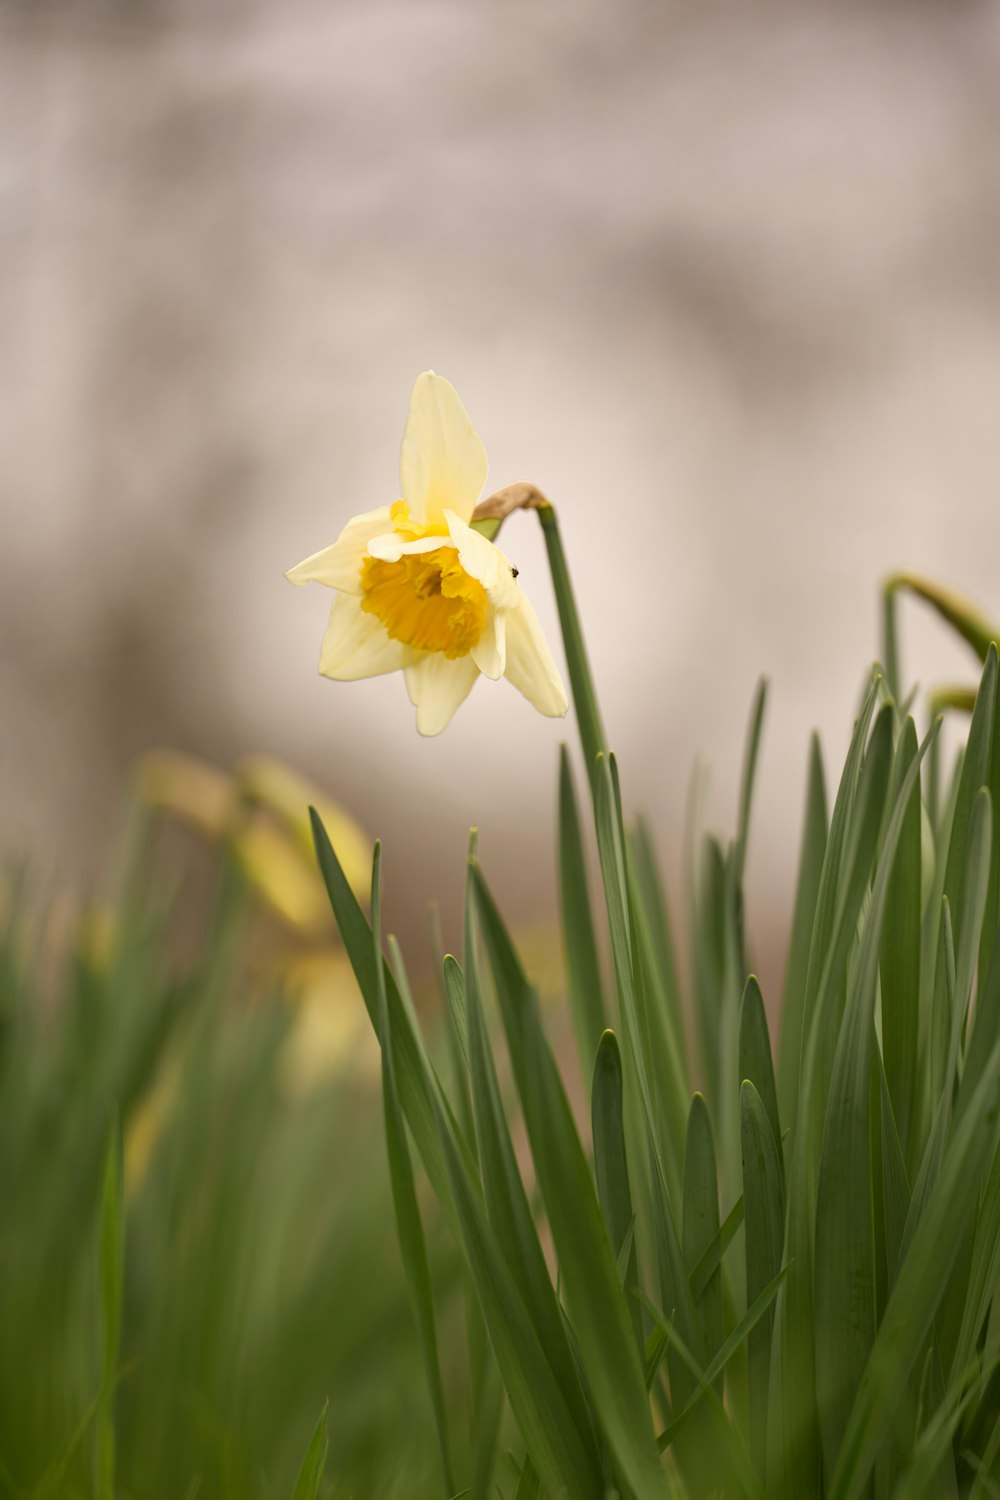 a single yellow and white flower in the grass